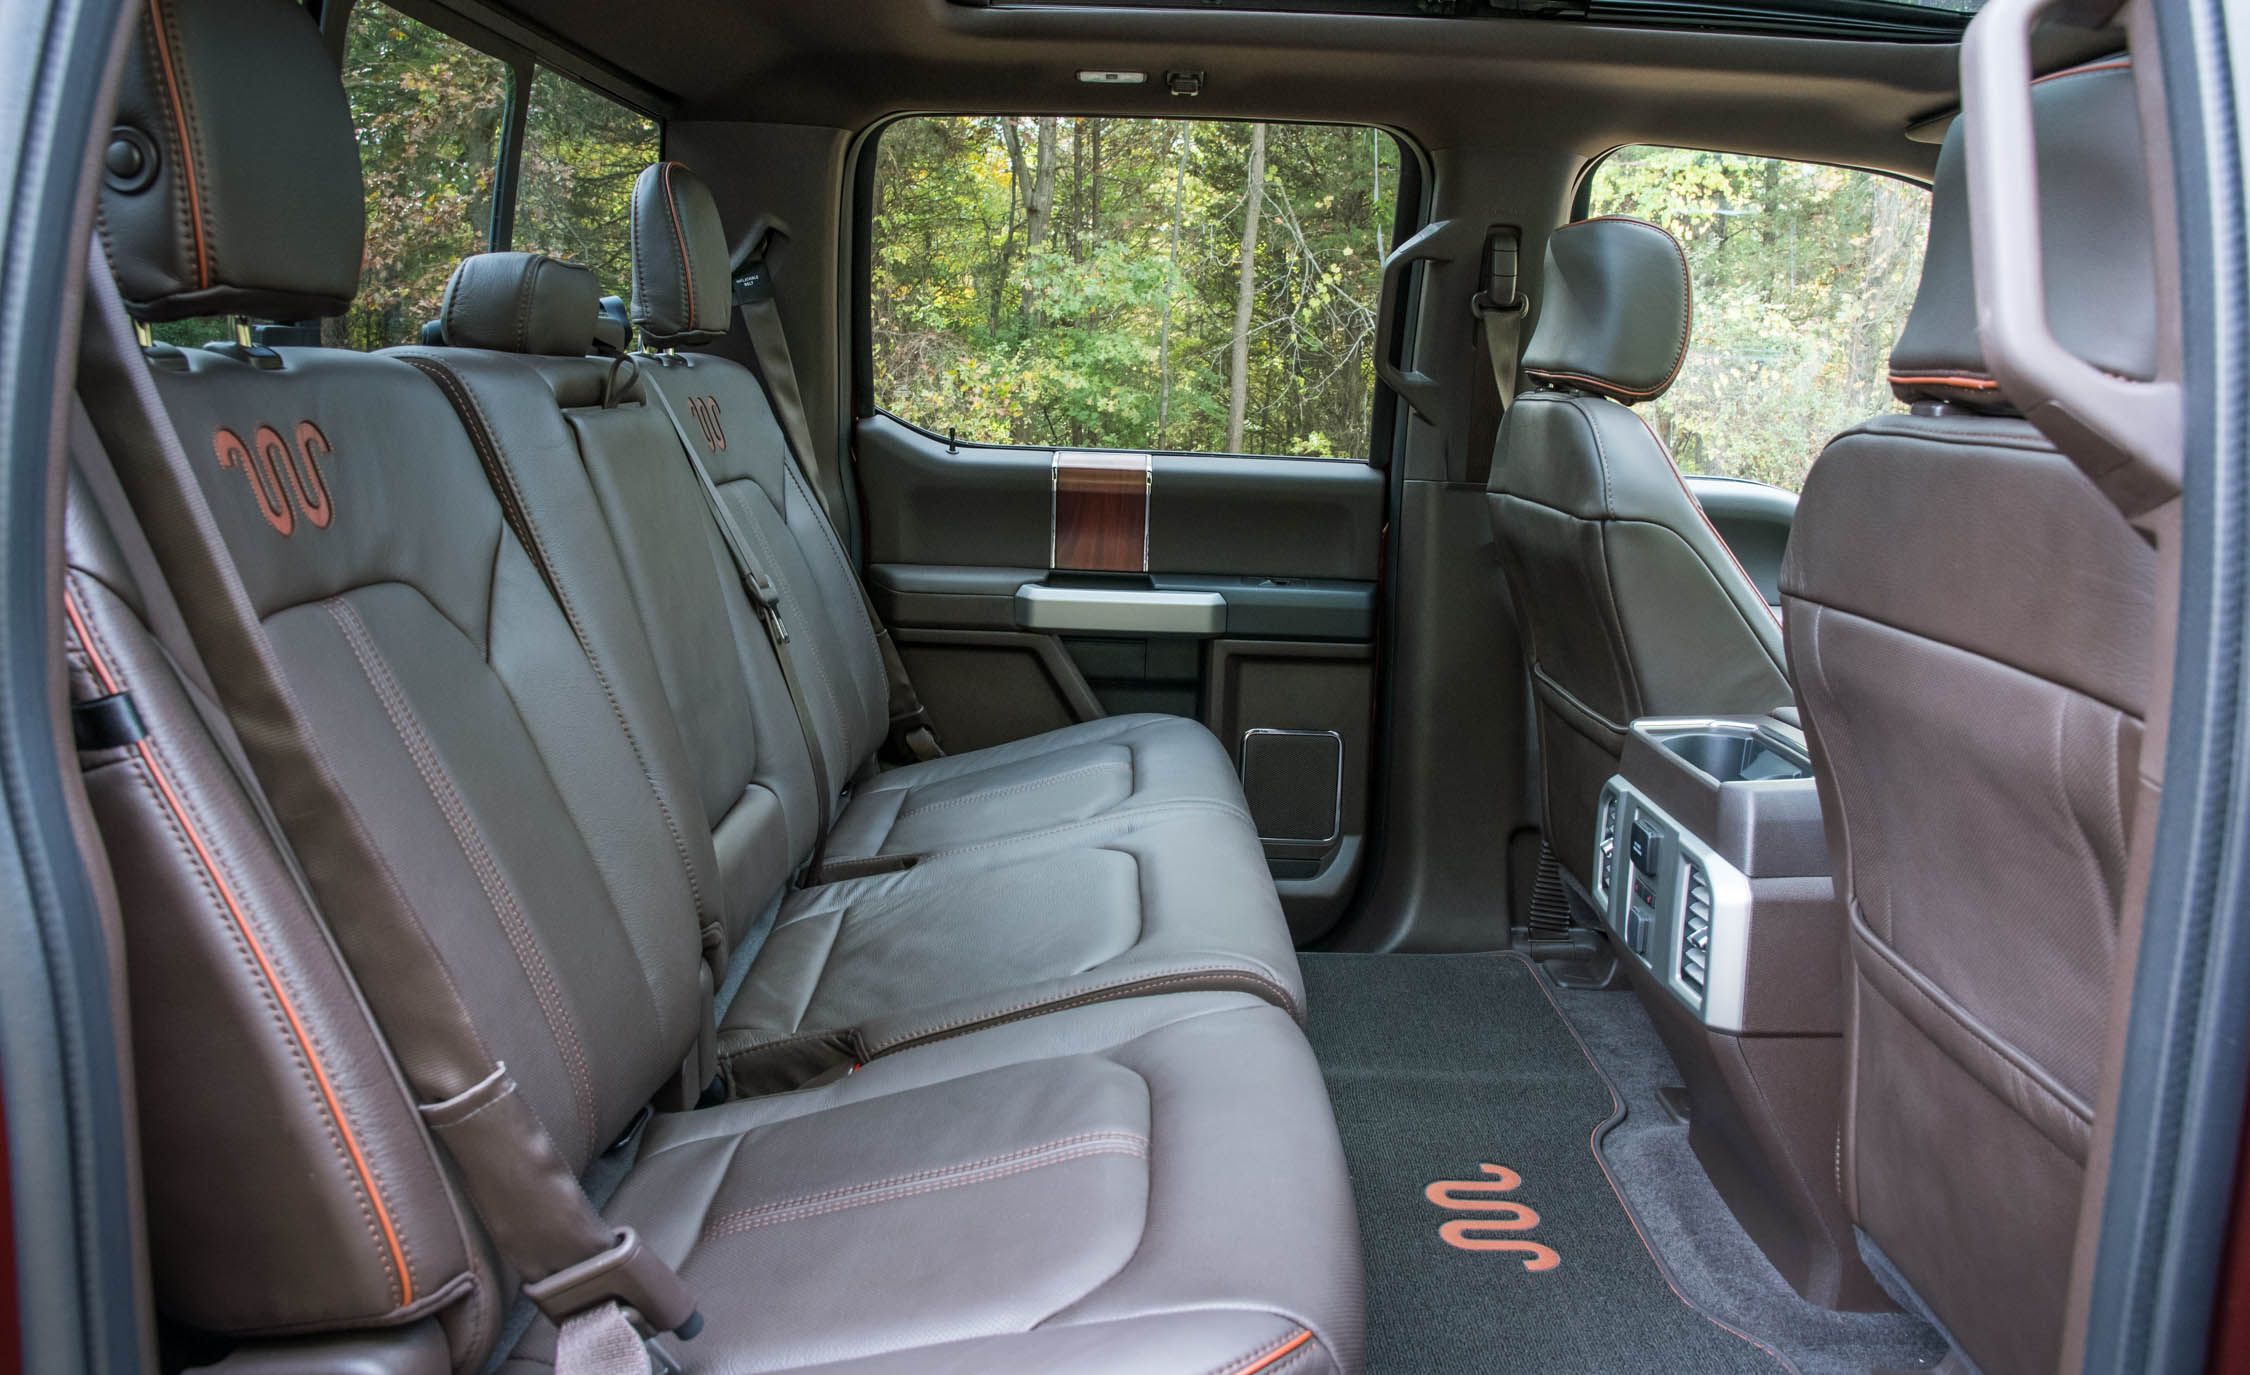 2017 Ford F 150 King Ranch Interior Seats Passengers Space (View 22 of 50)